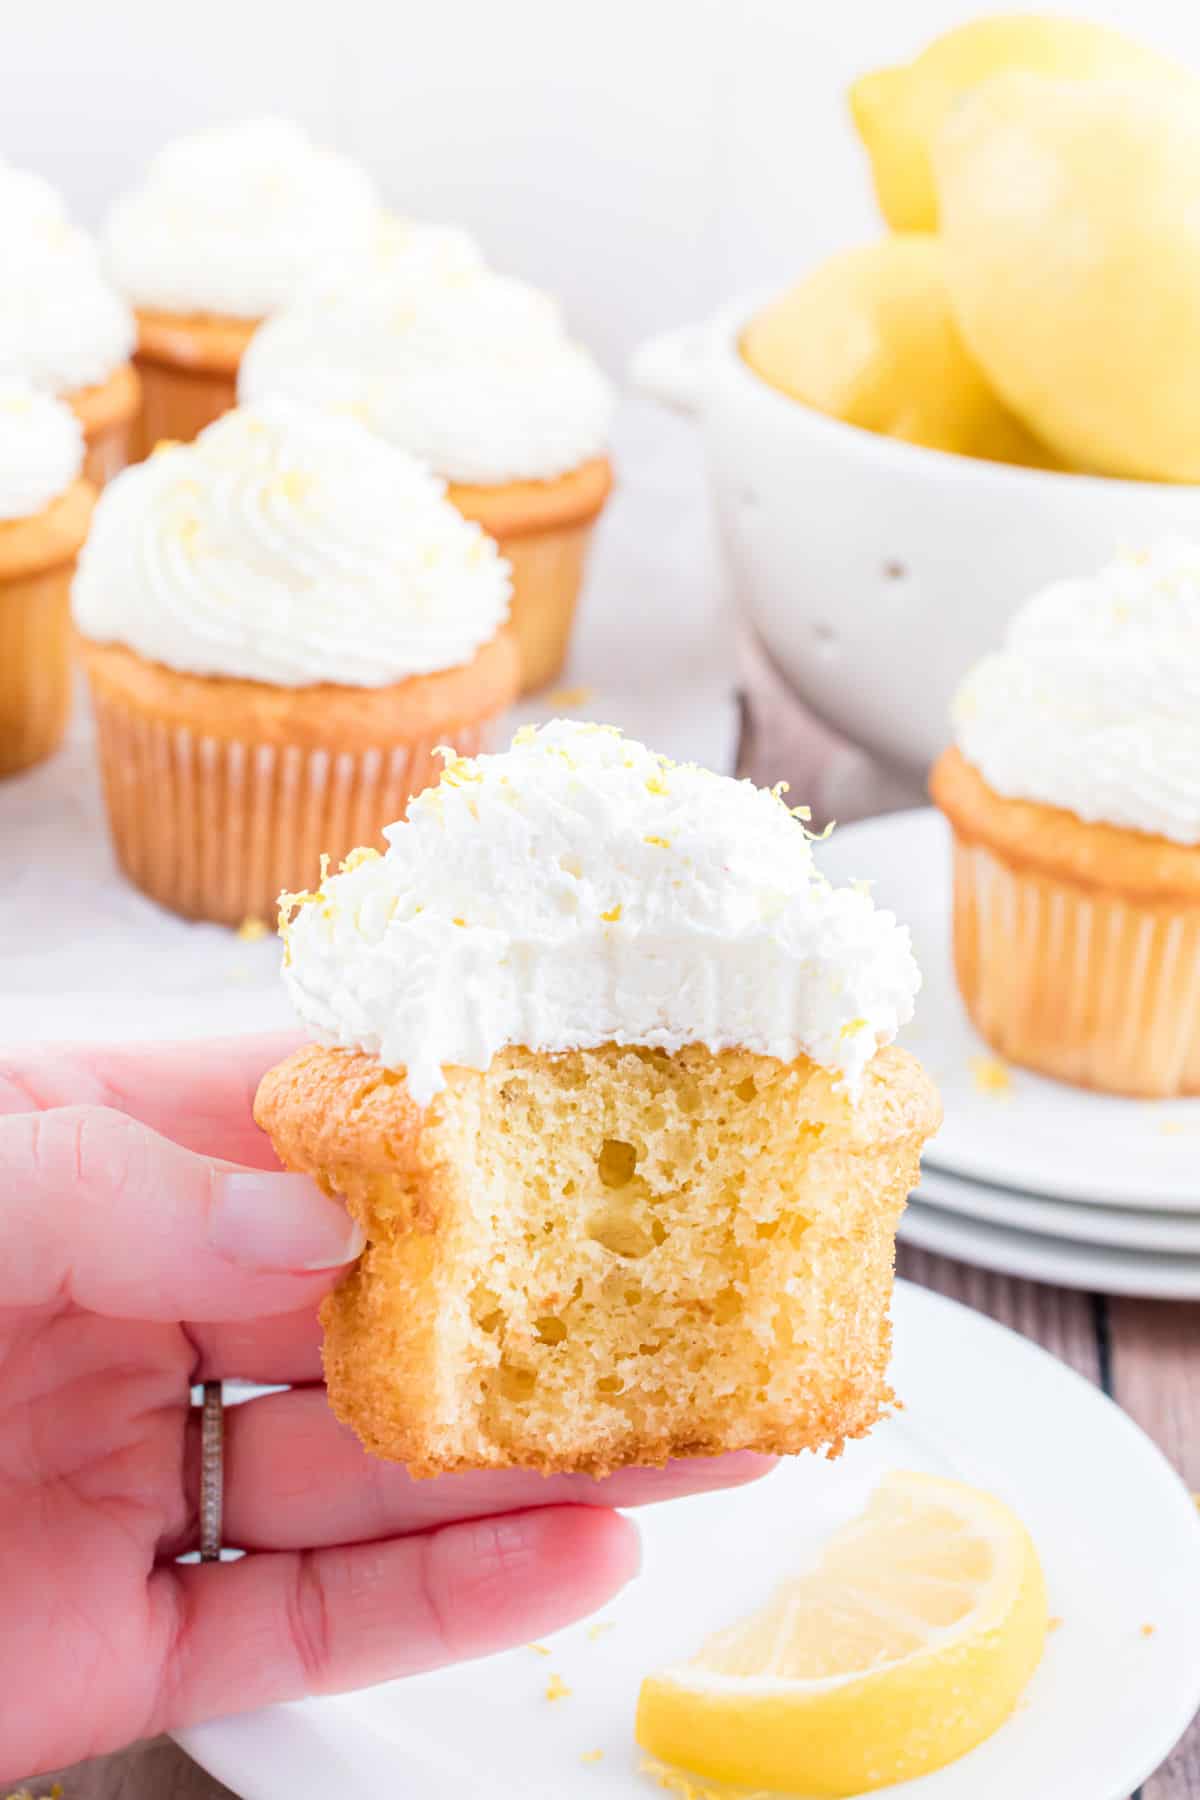 Lemon frosted cupcake with a bite taken out.